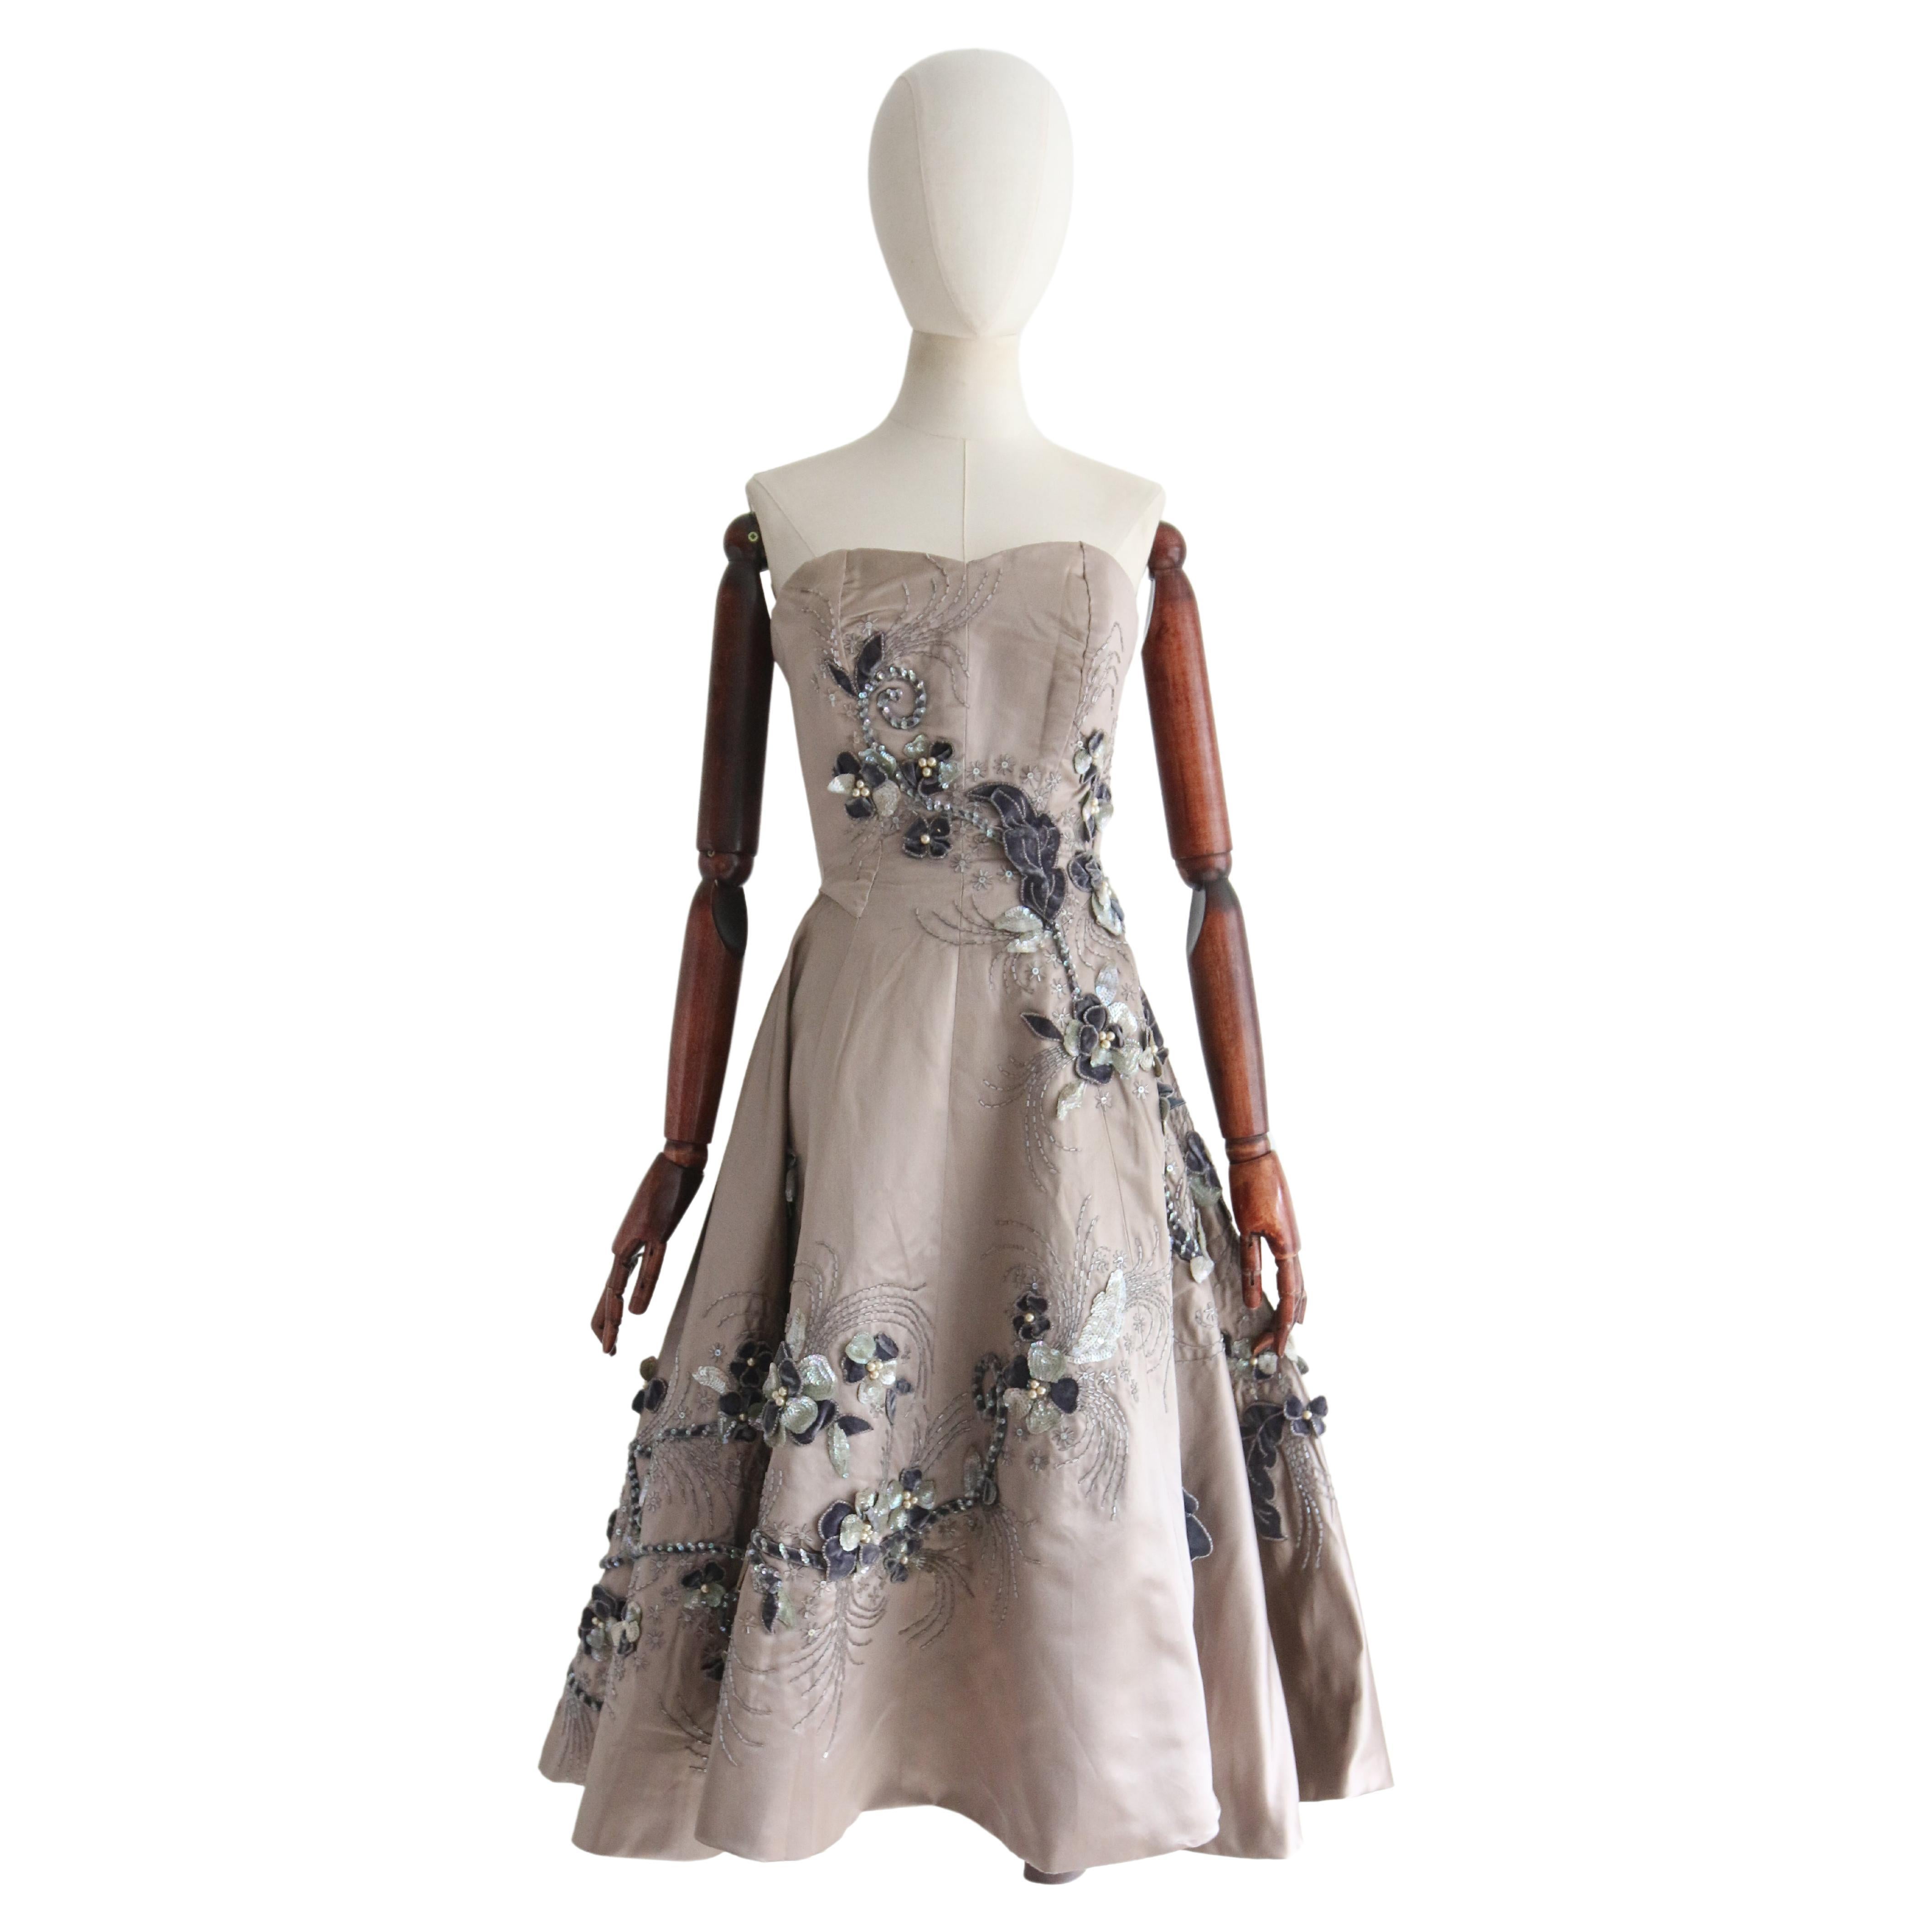 Rendered in the most exquisite stone coloured satin and embellished with silver glass bugle beads, pearlescent beads, iridescent sequins, and silk velvet, depicting a wild and blooming trailing floral pattern, this original 1950's couture dress is a